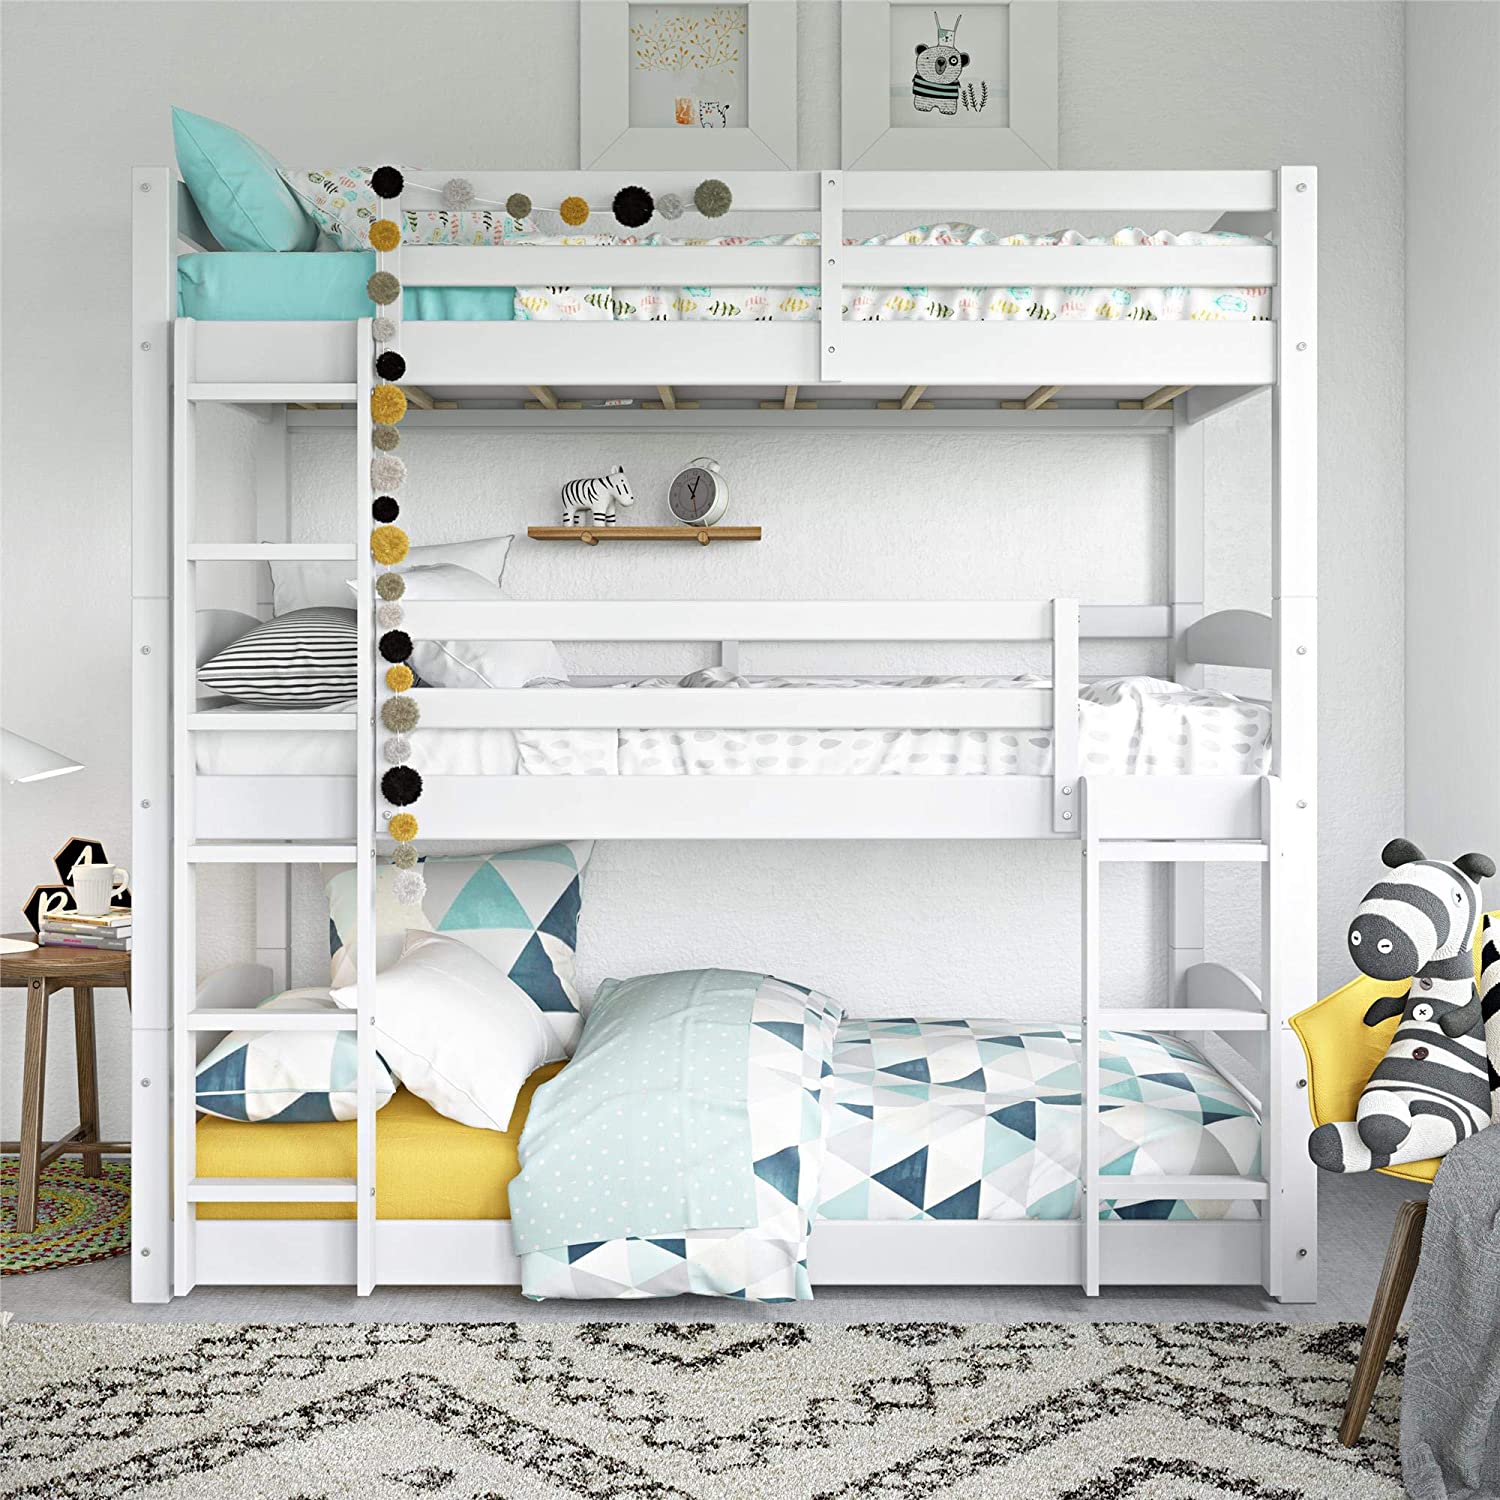 26 Bunk Beds You Ll Want For Yourself, Bunk Bed Ideas For Boy And Girl